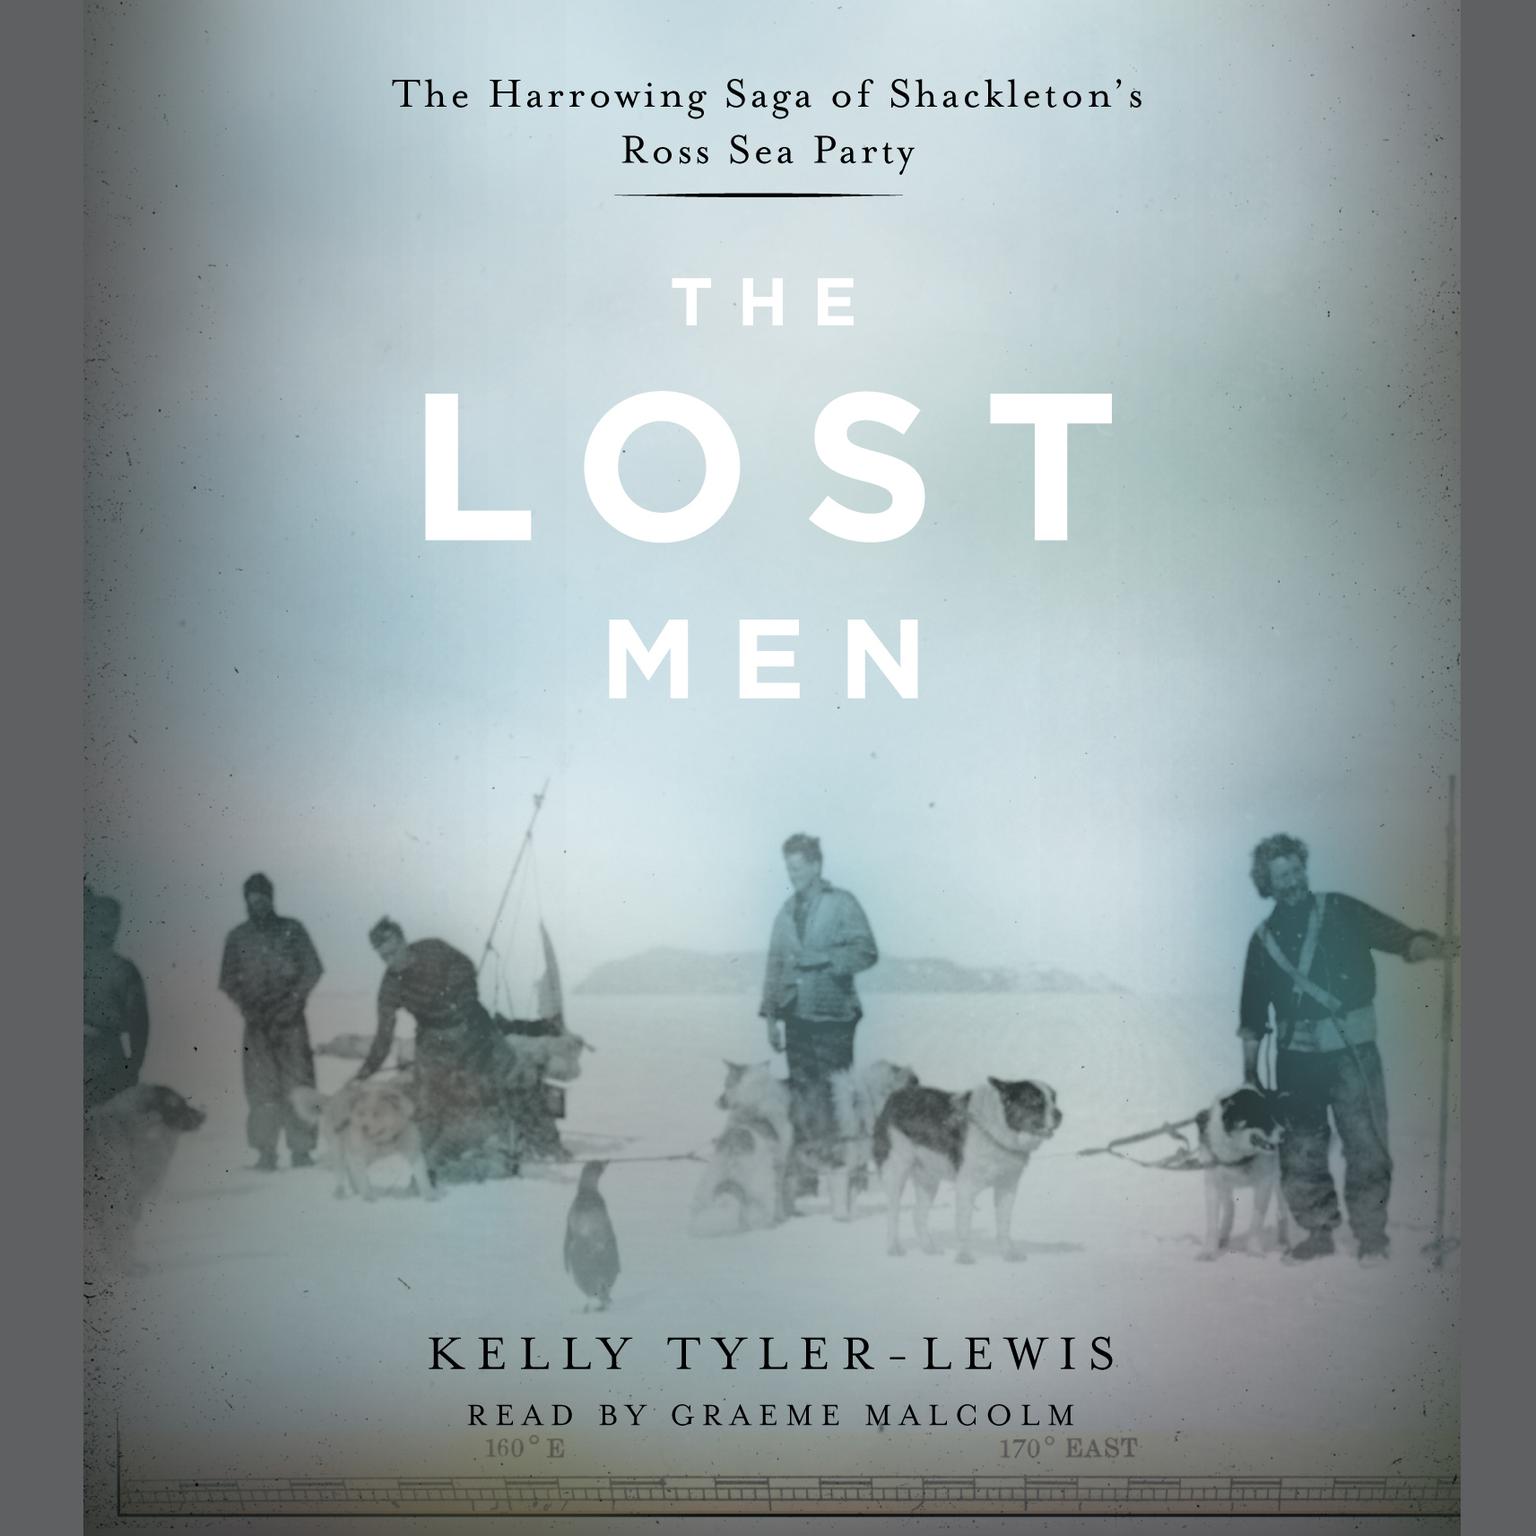 The Lost Men (Abridged): The Harrowing Saga of Shackletons Ross Sea Party Audiobook, by Kelly Tyler-Lewis